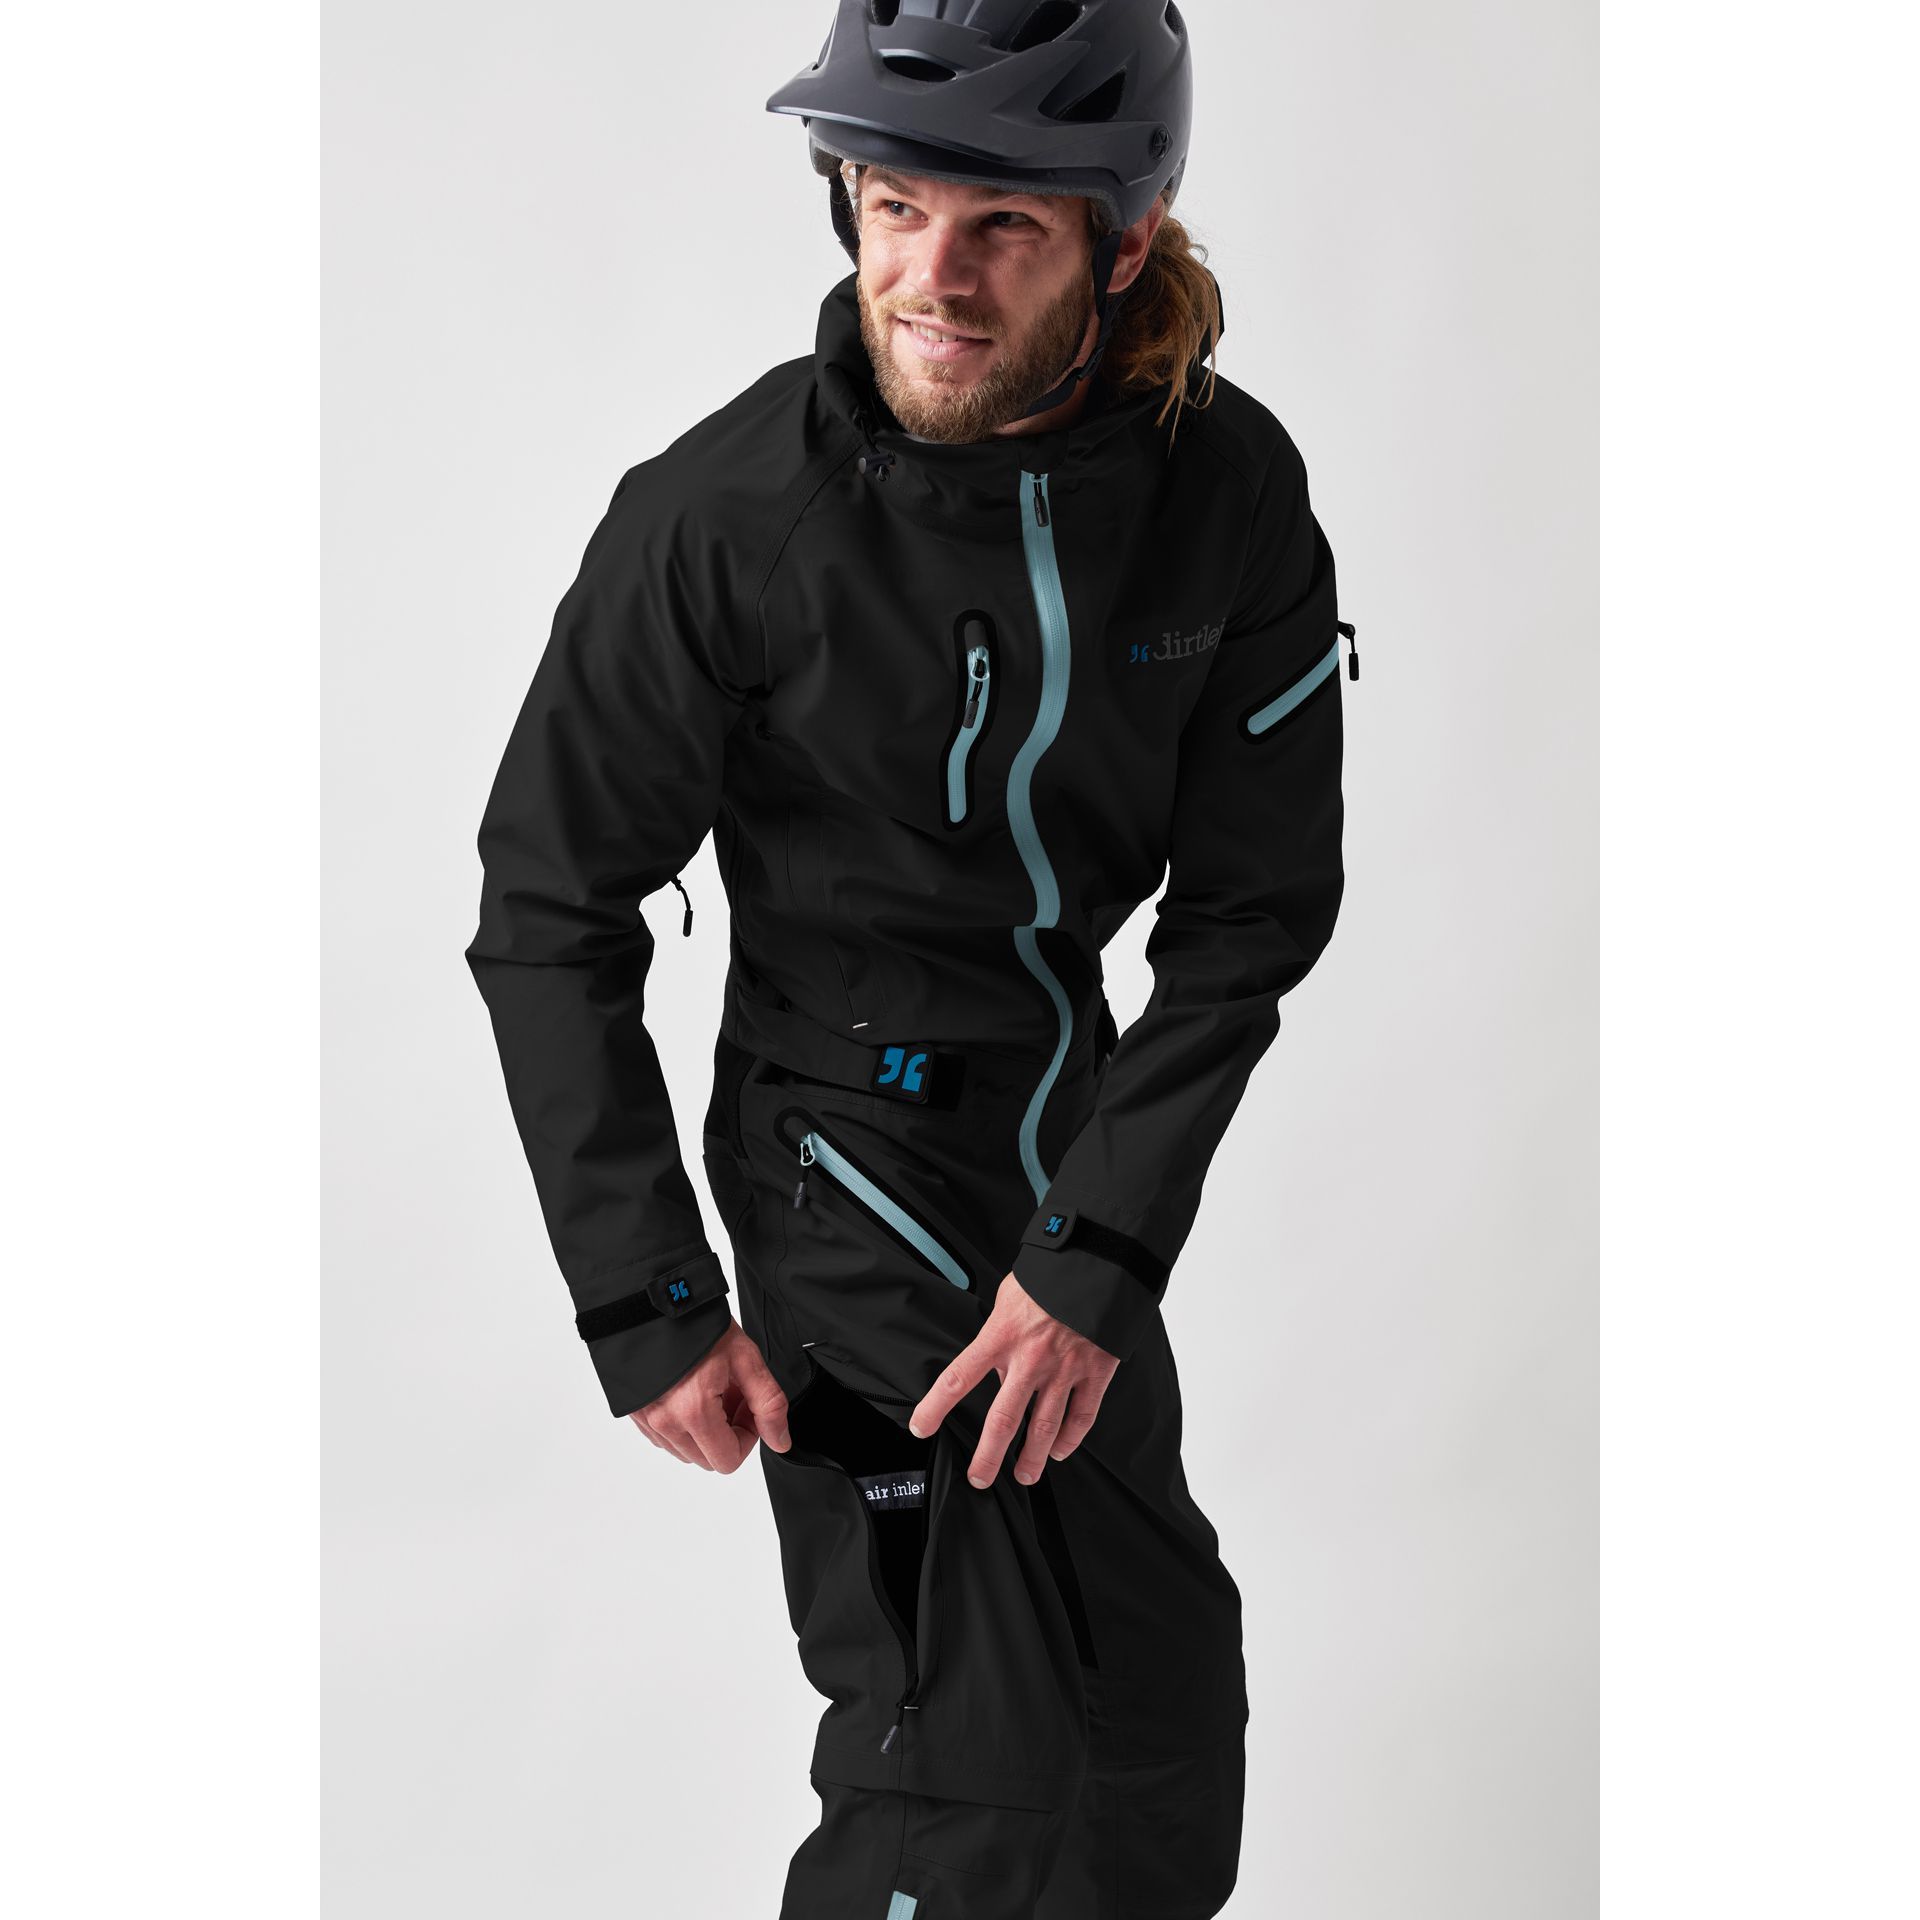 dirtsuit core edition blacklabel - Abnehmbare Beine